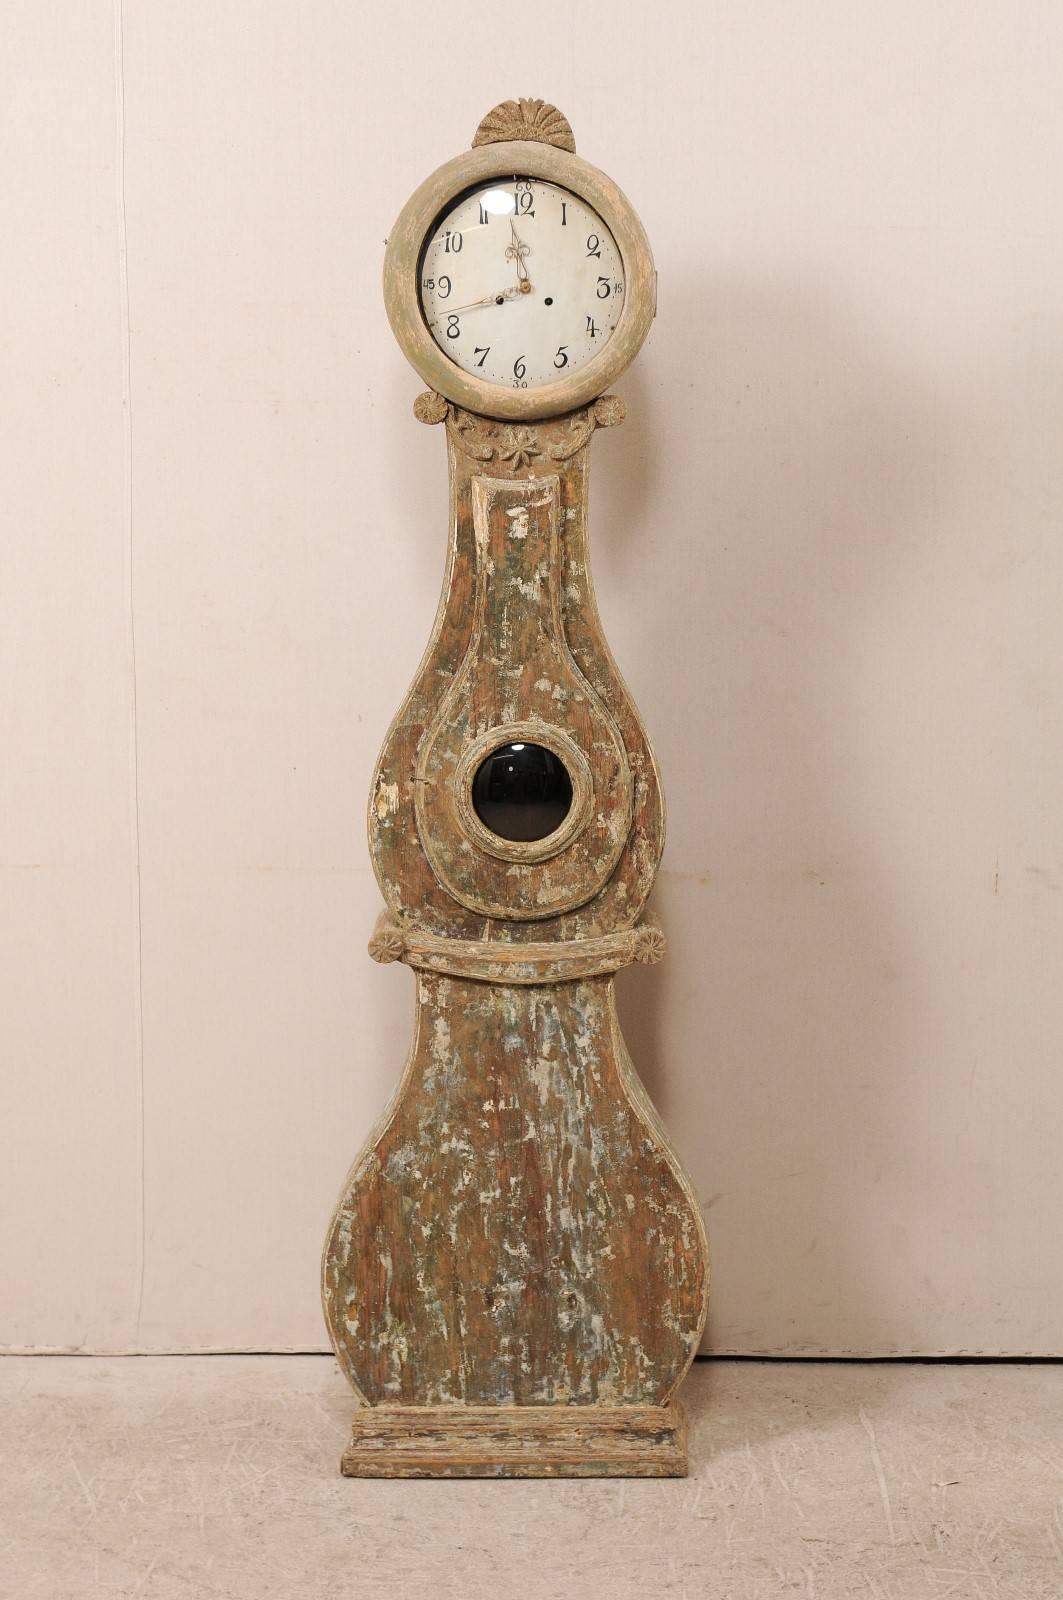 A 19th century, Swedish painted wood Fryksdahl clock. This Fryksdahl clock features a carved crest depicting some foliage with a central flower, volute accents at the neck with a central star, an accentuated waist, and round face. This clock retains